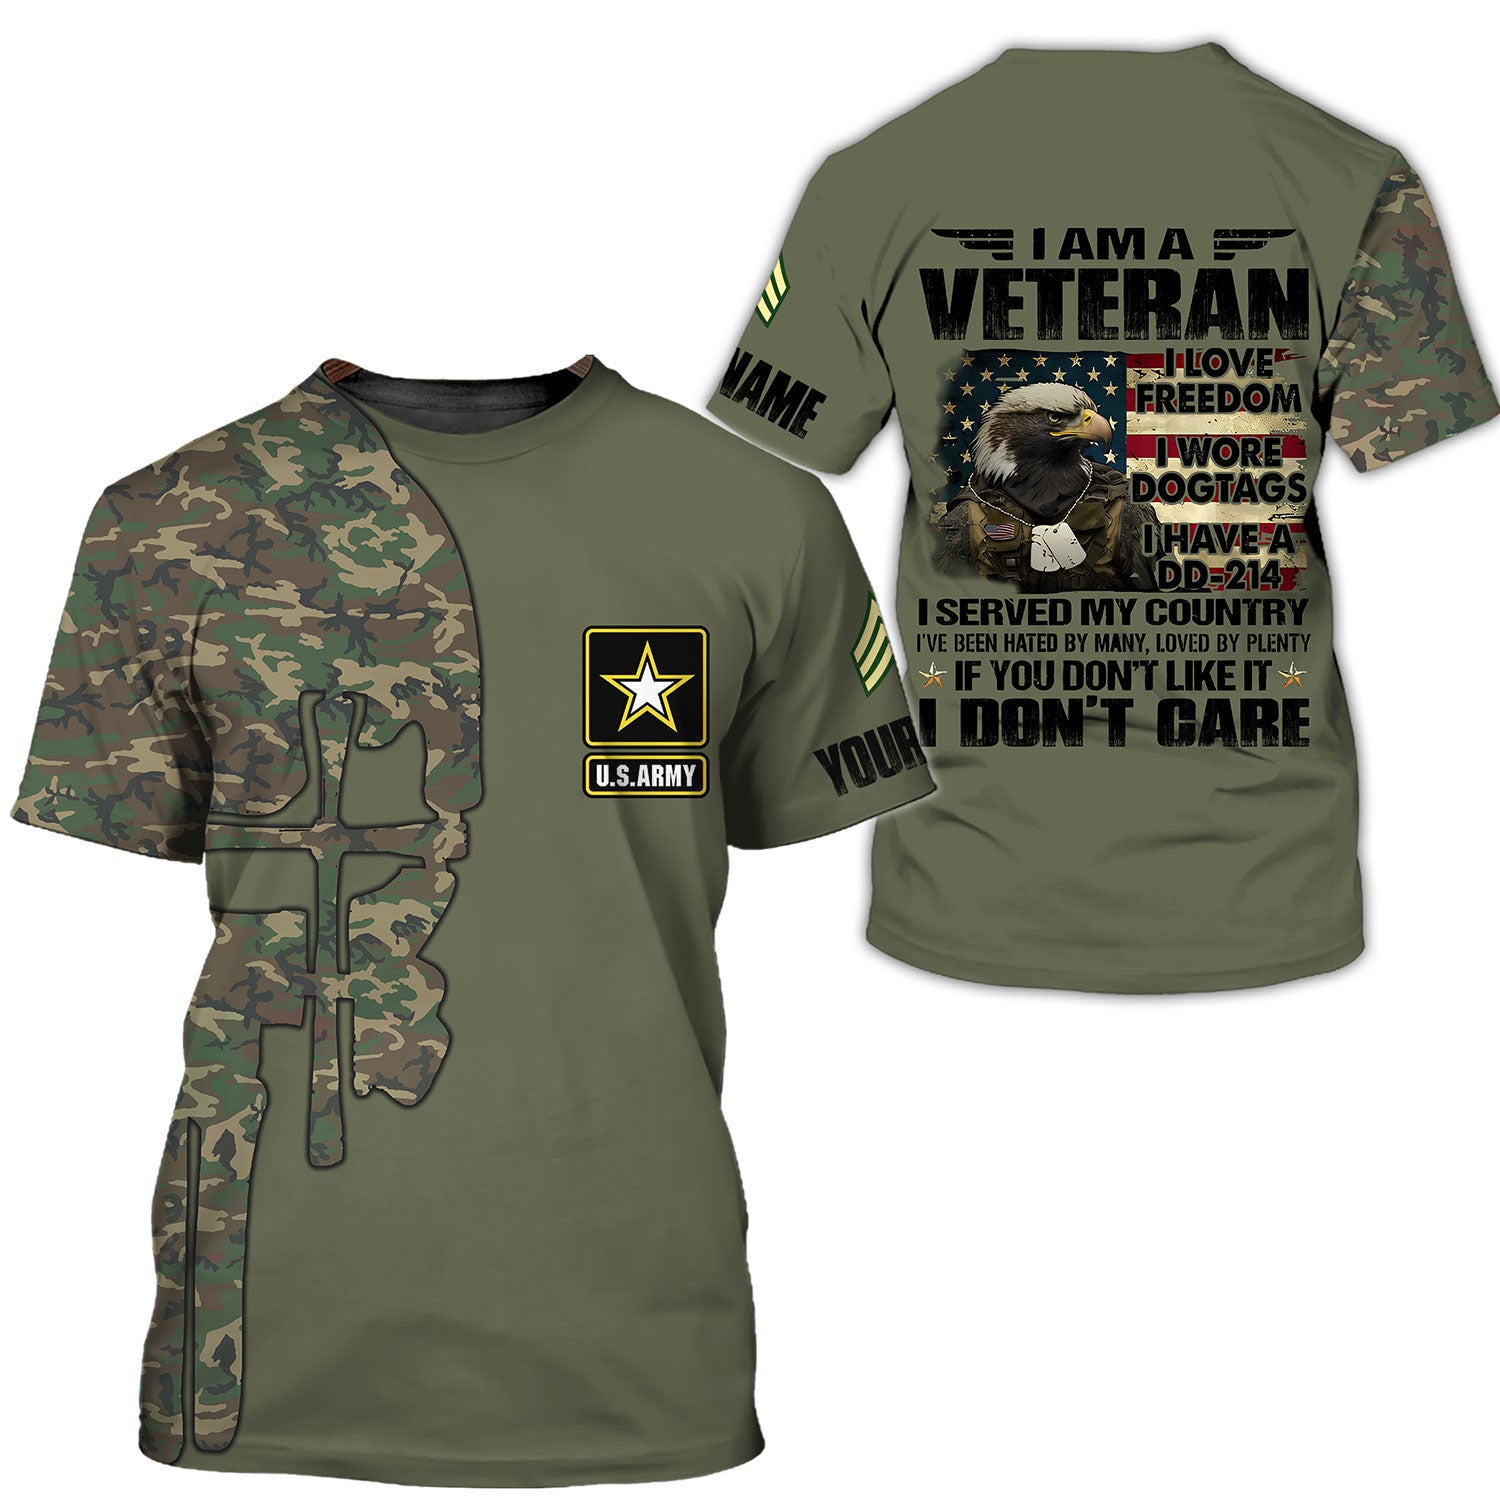 I Am Veteran - I love Freedom - I Wore Dogtags - I Have A DD-214 - Customized U.S. Veteran Army T-Shirt, Gift For Veterans